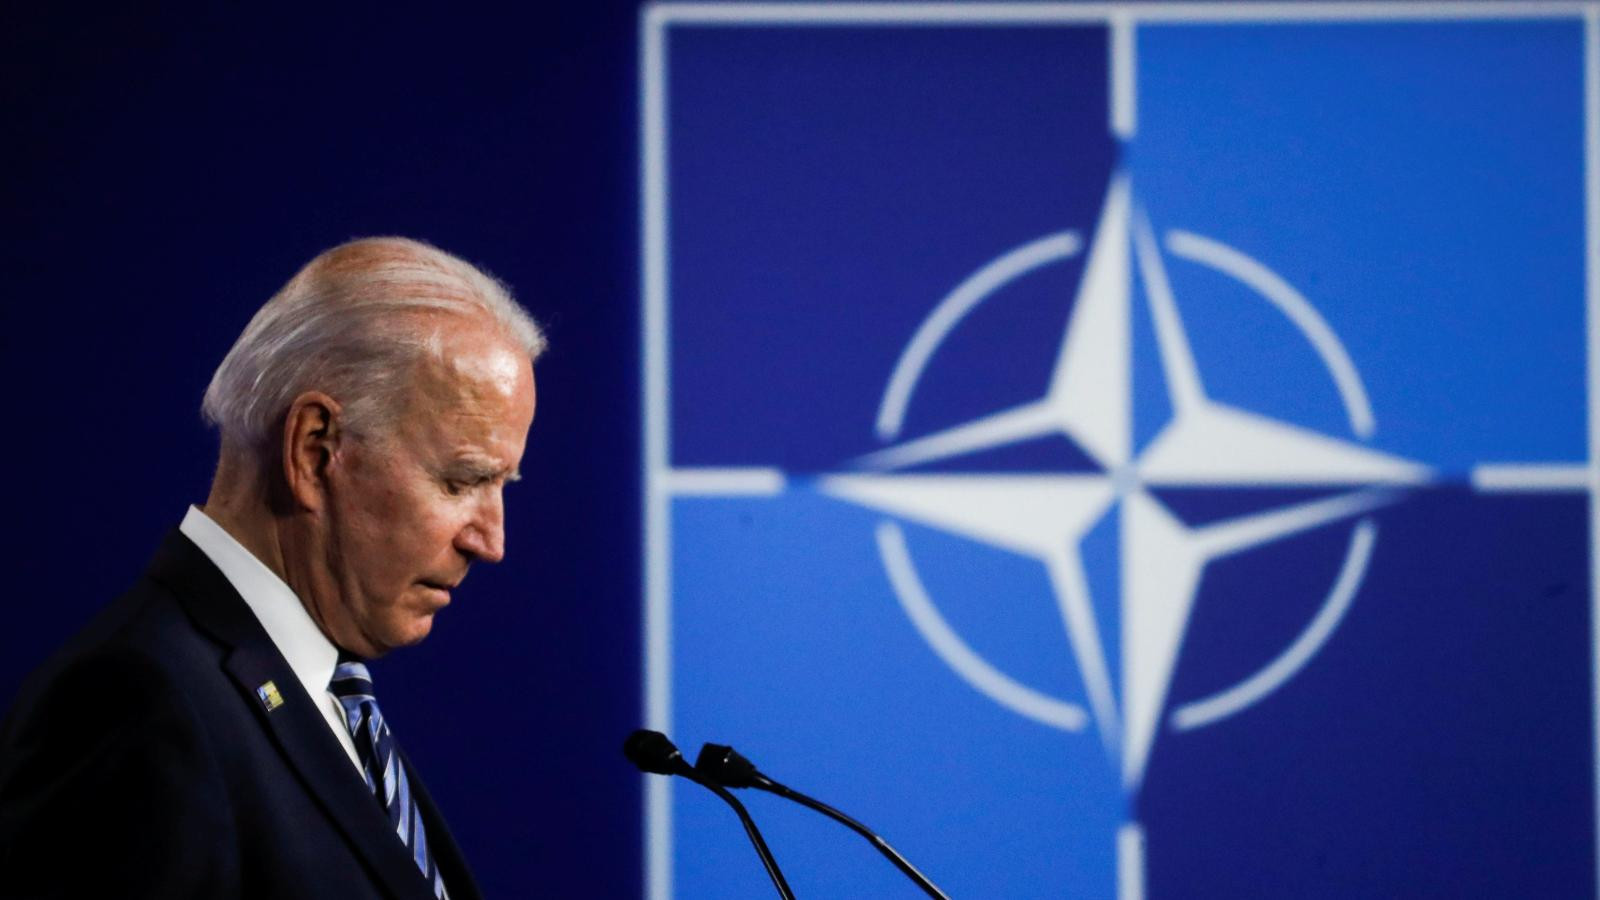 NATO approves 4 battle groups to counter Russia over invasion of Ukraine